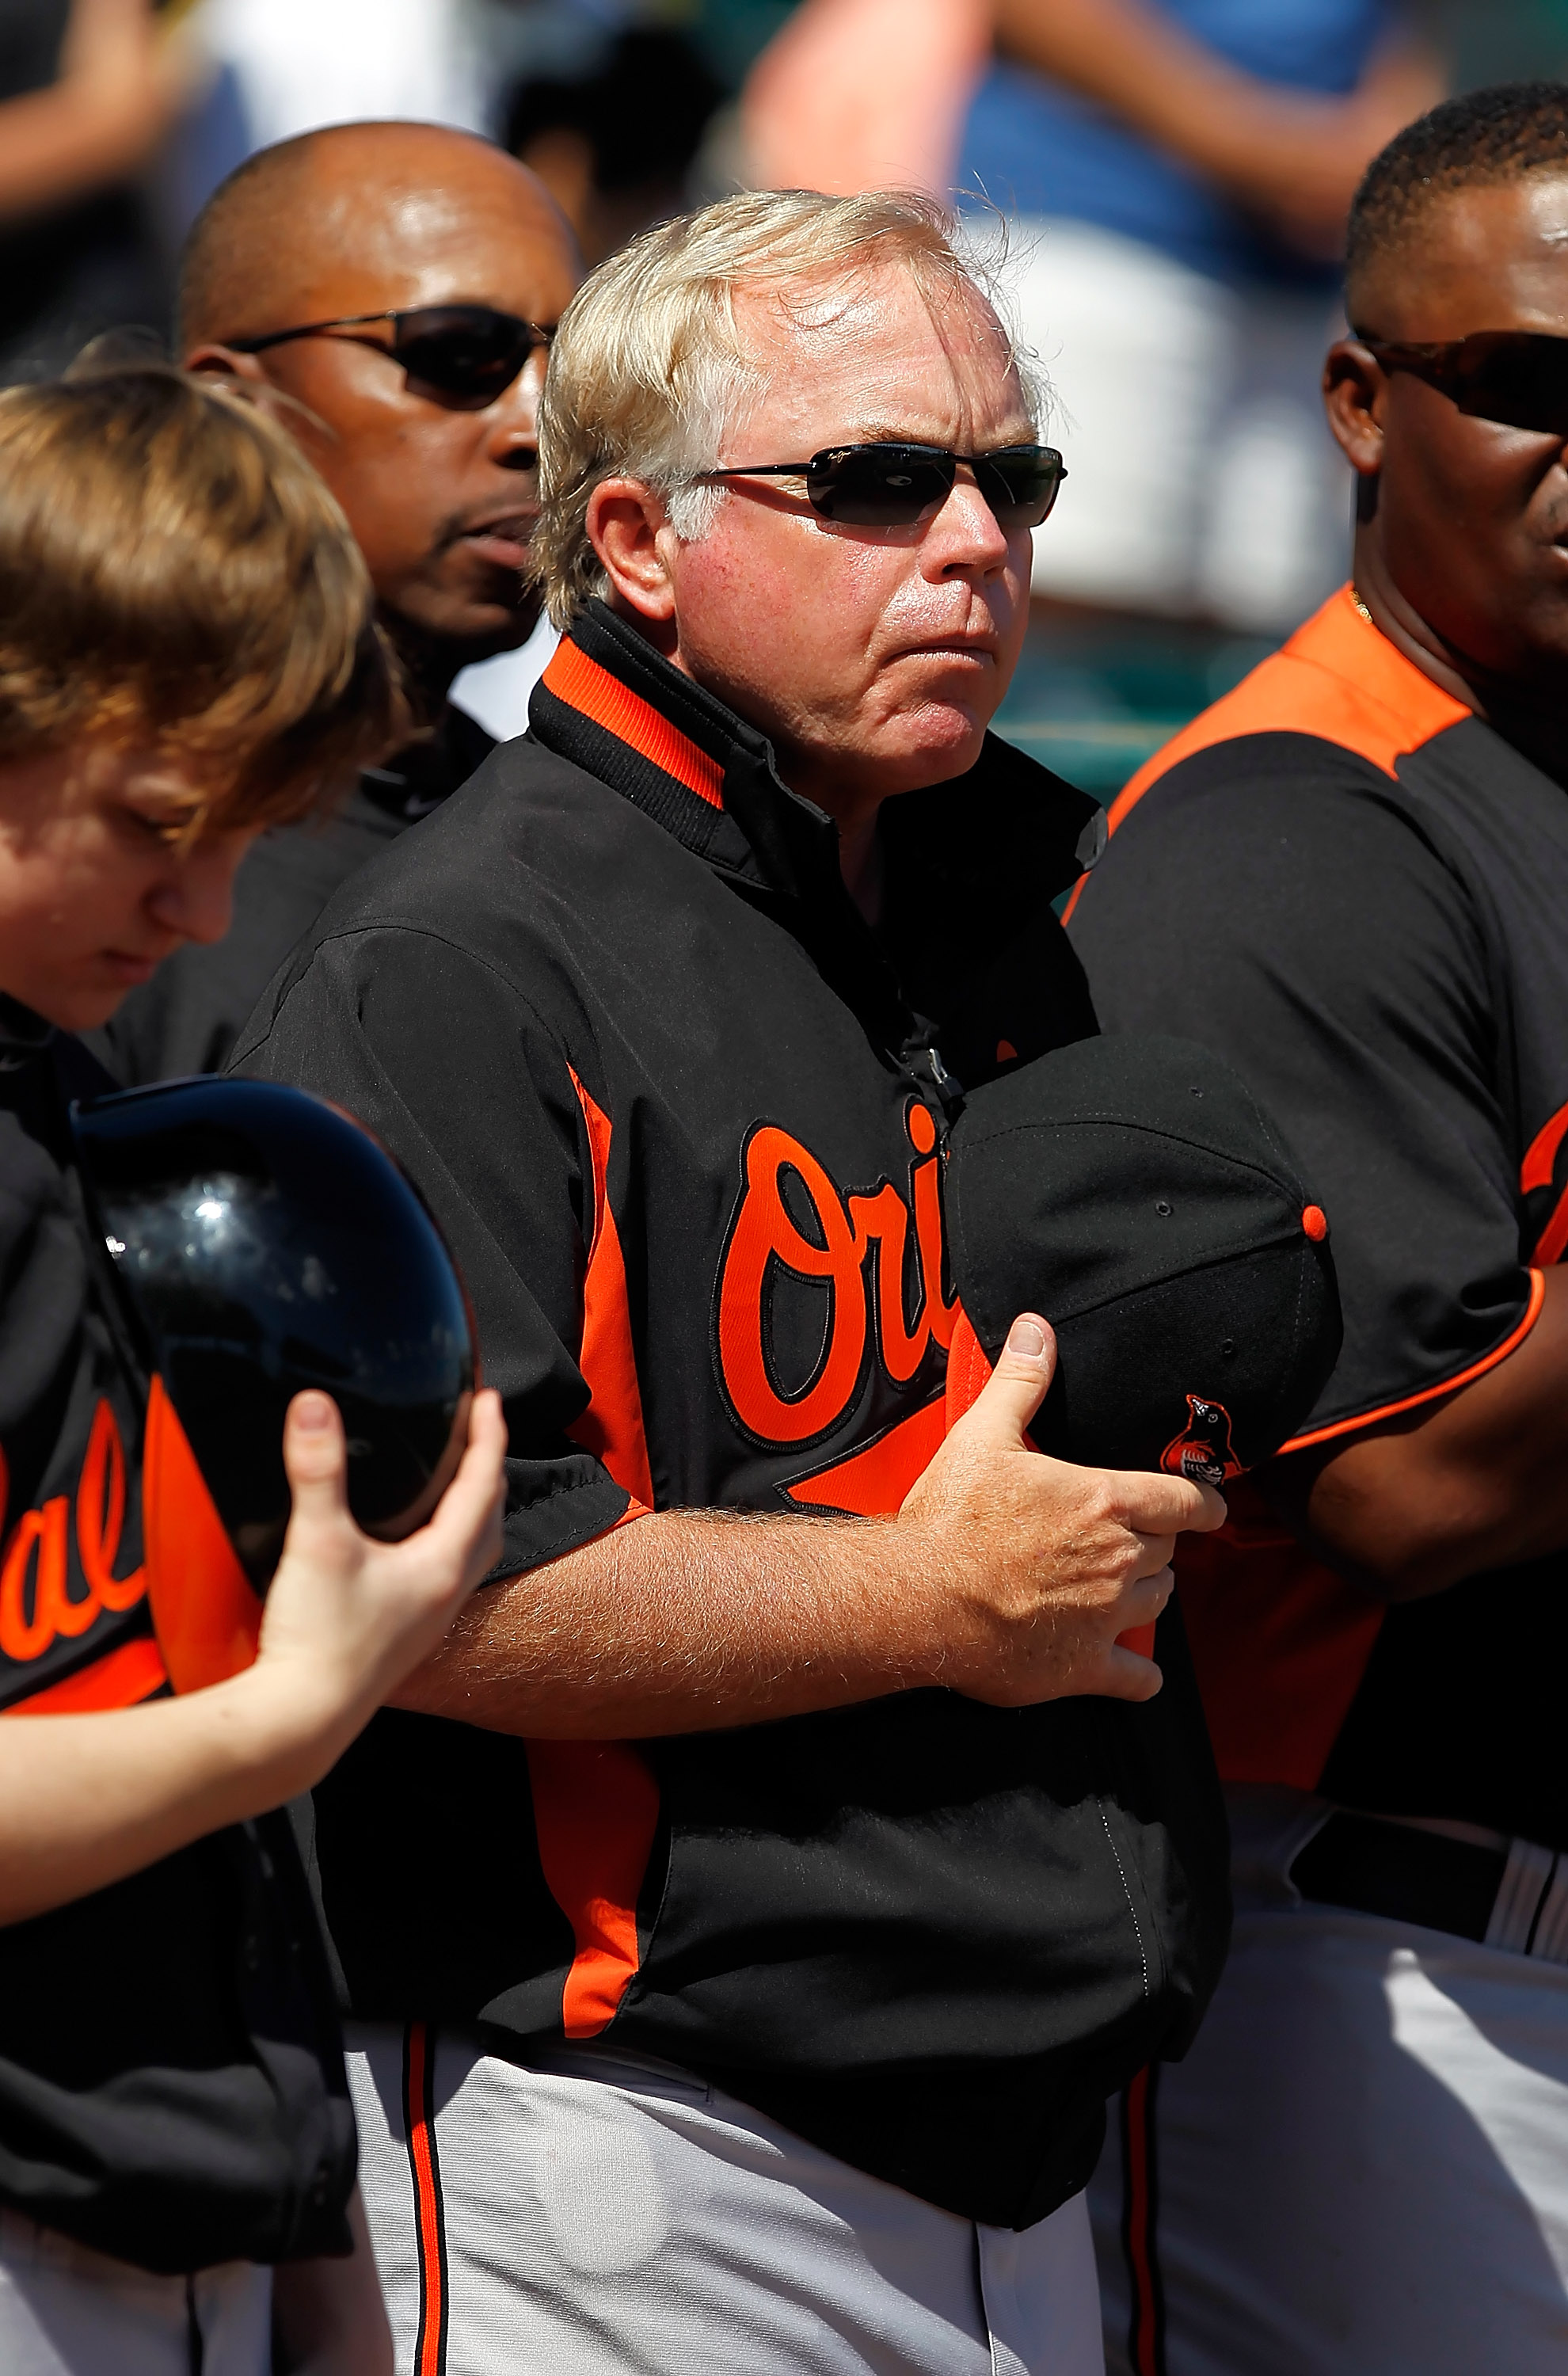 BRADENTON, FL - FEBRUARY 28:  Manager Buck Showalter #26 of the Baltimore Orioles stands for the National Anthem just before the start of the Grapefruit League Spring Training Game against the Pittsburgh Pirates at McKechnie Field on February 28, 2011 in